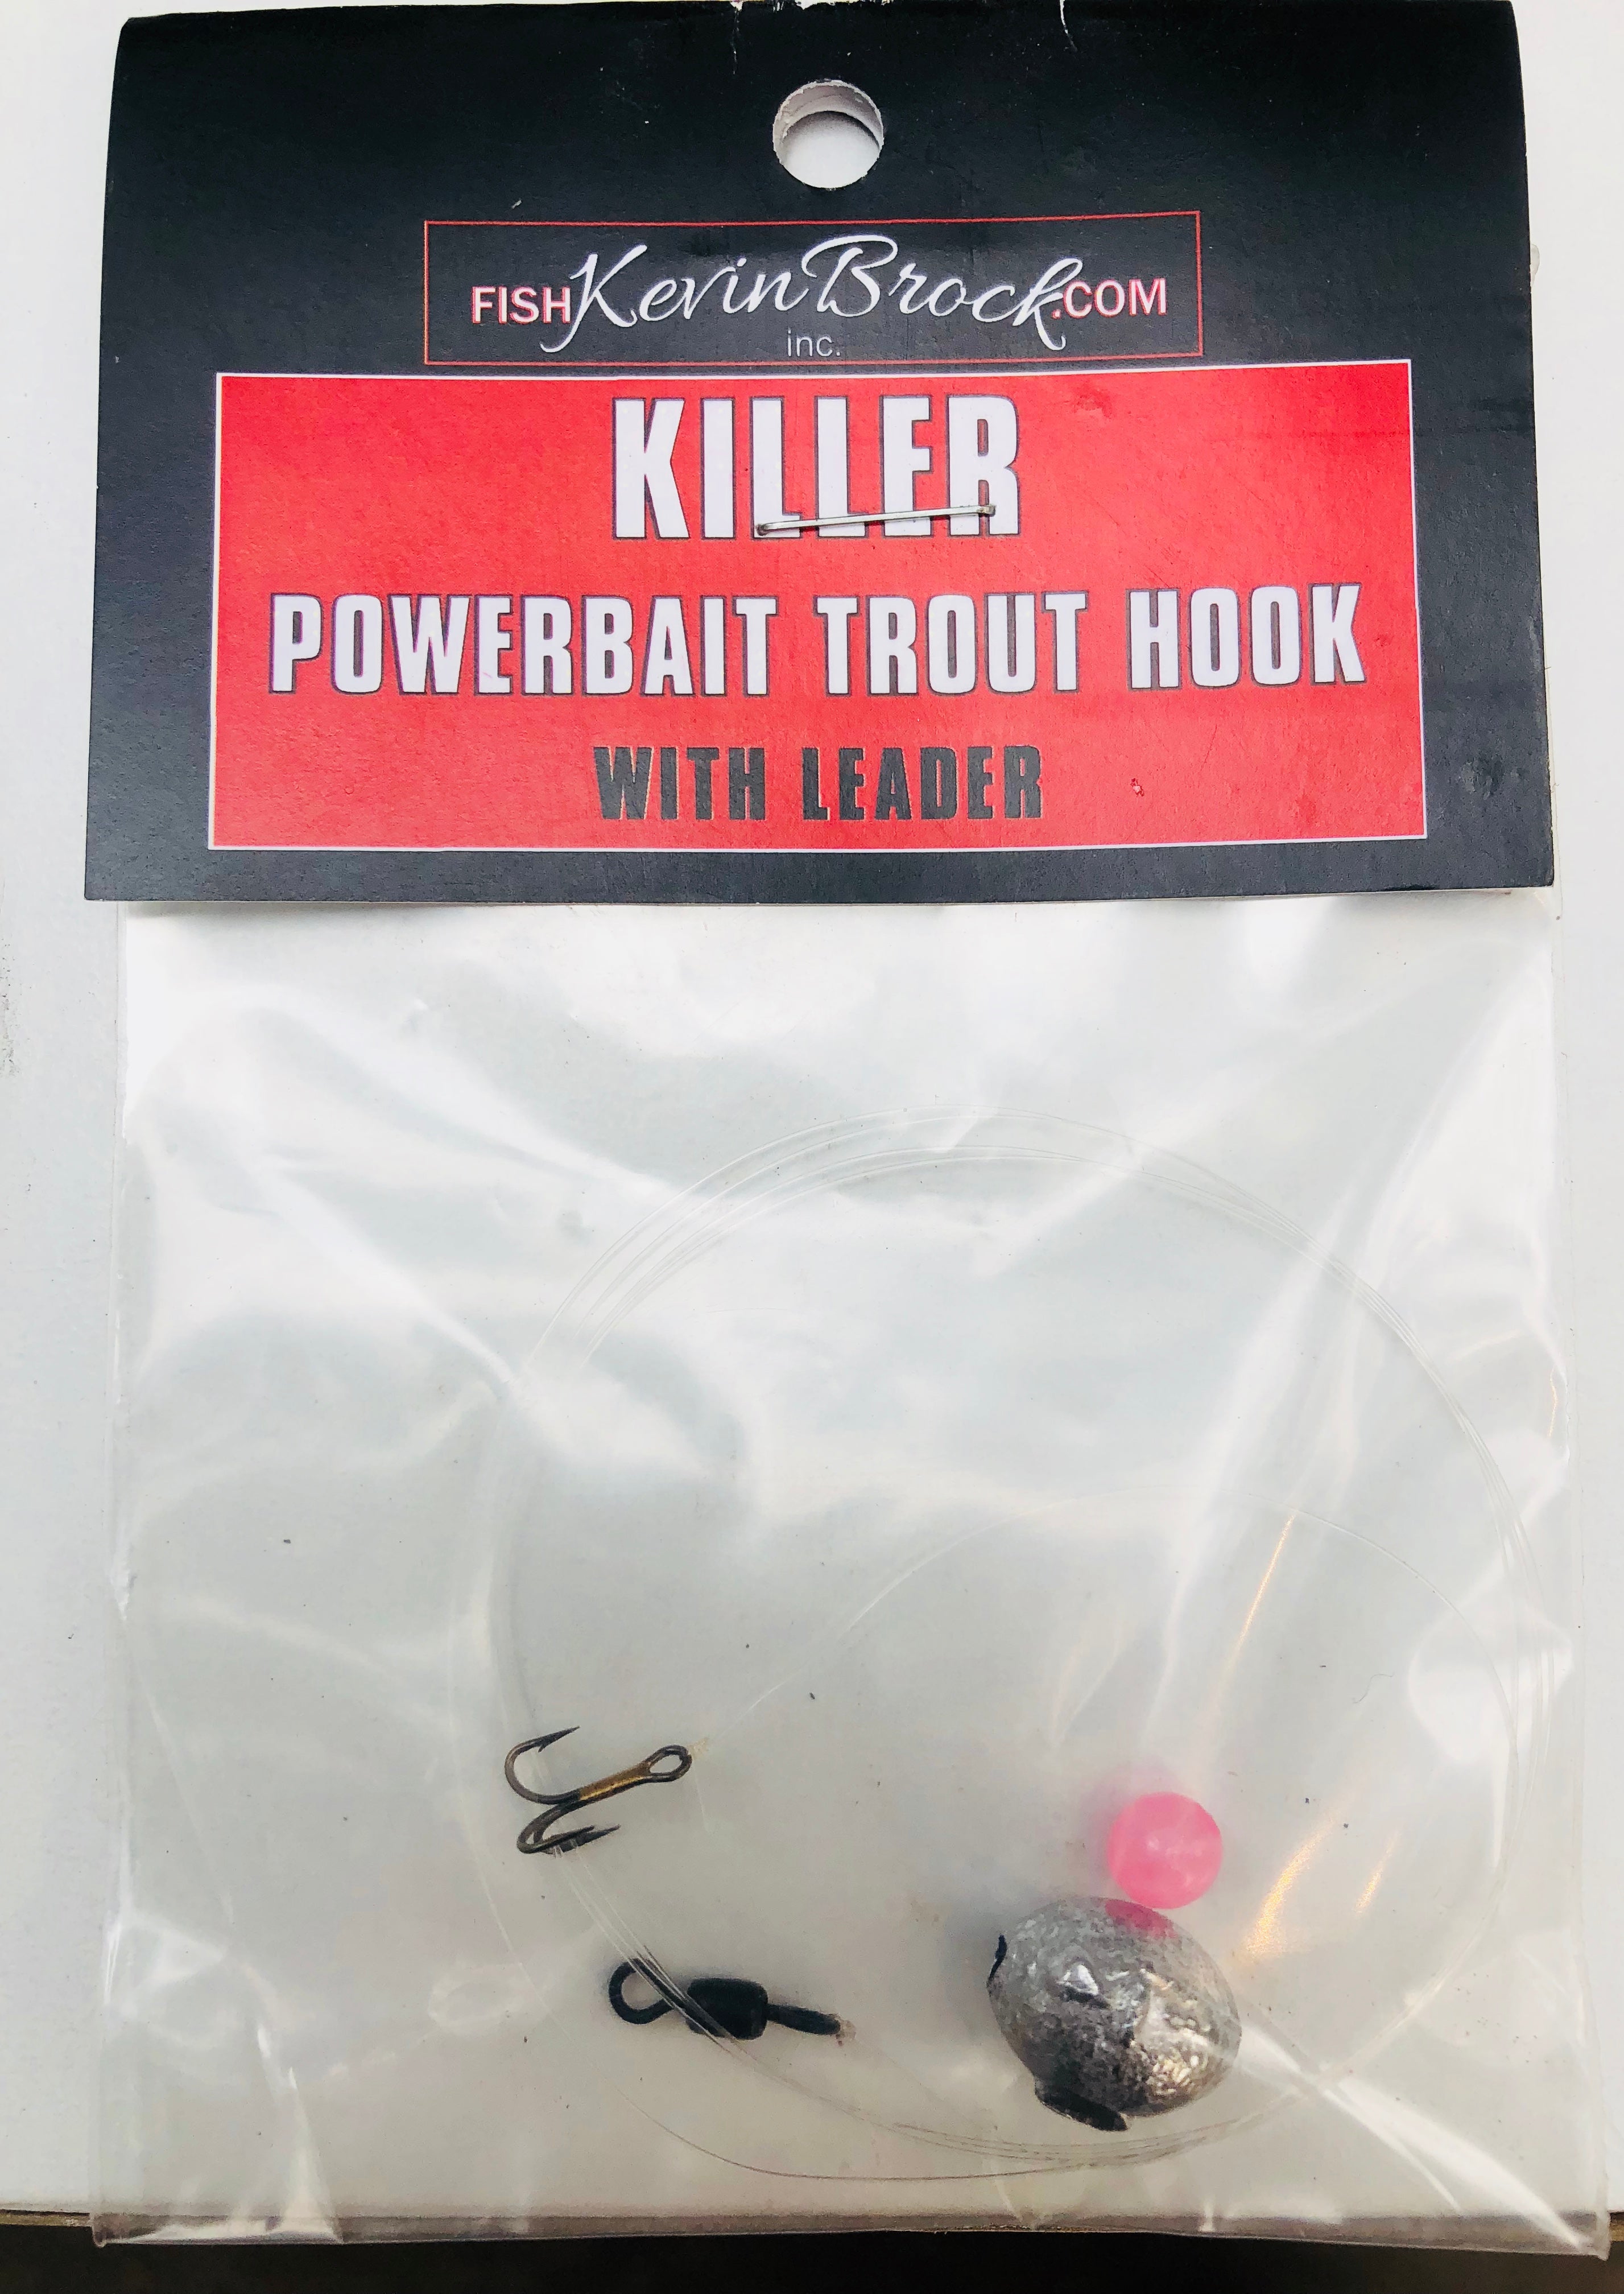 Killer Powerbait Trout Hook with Leader